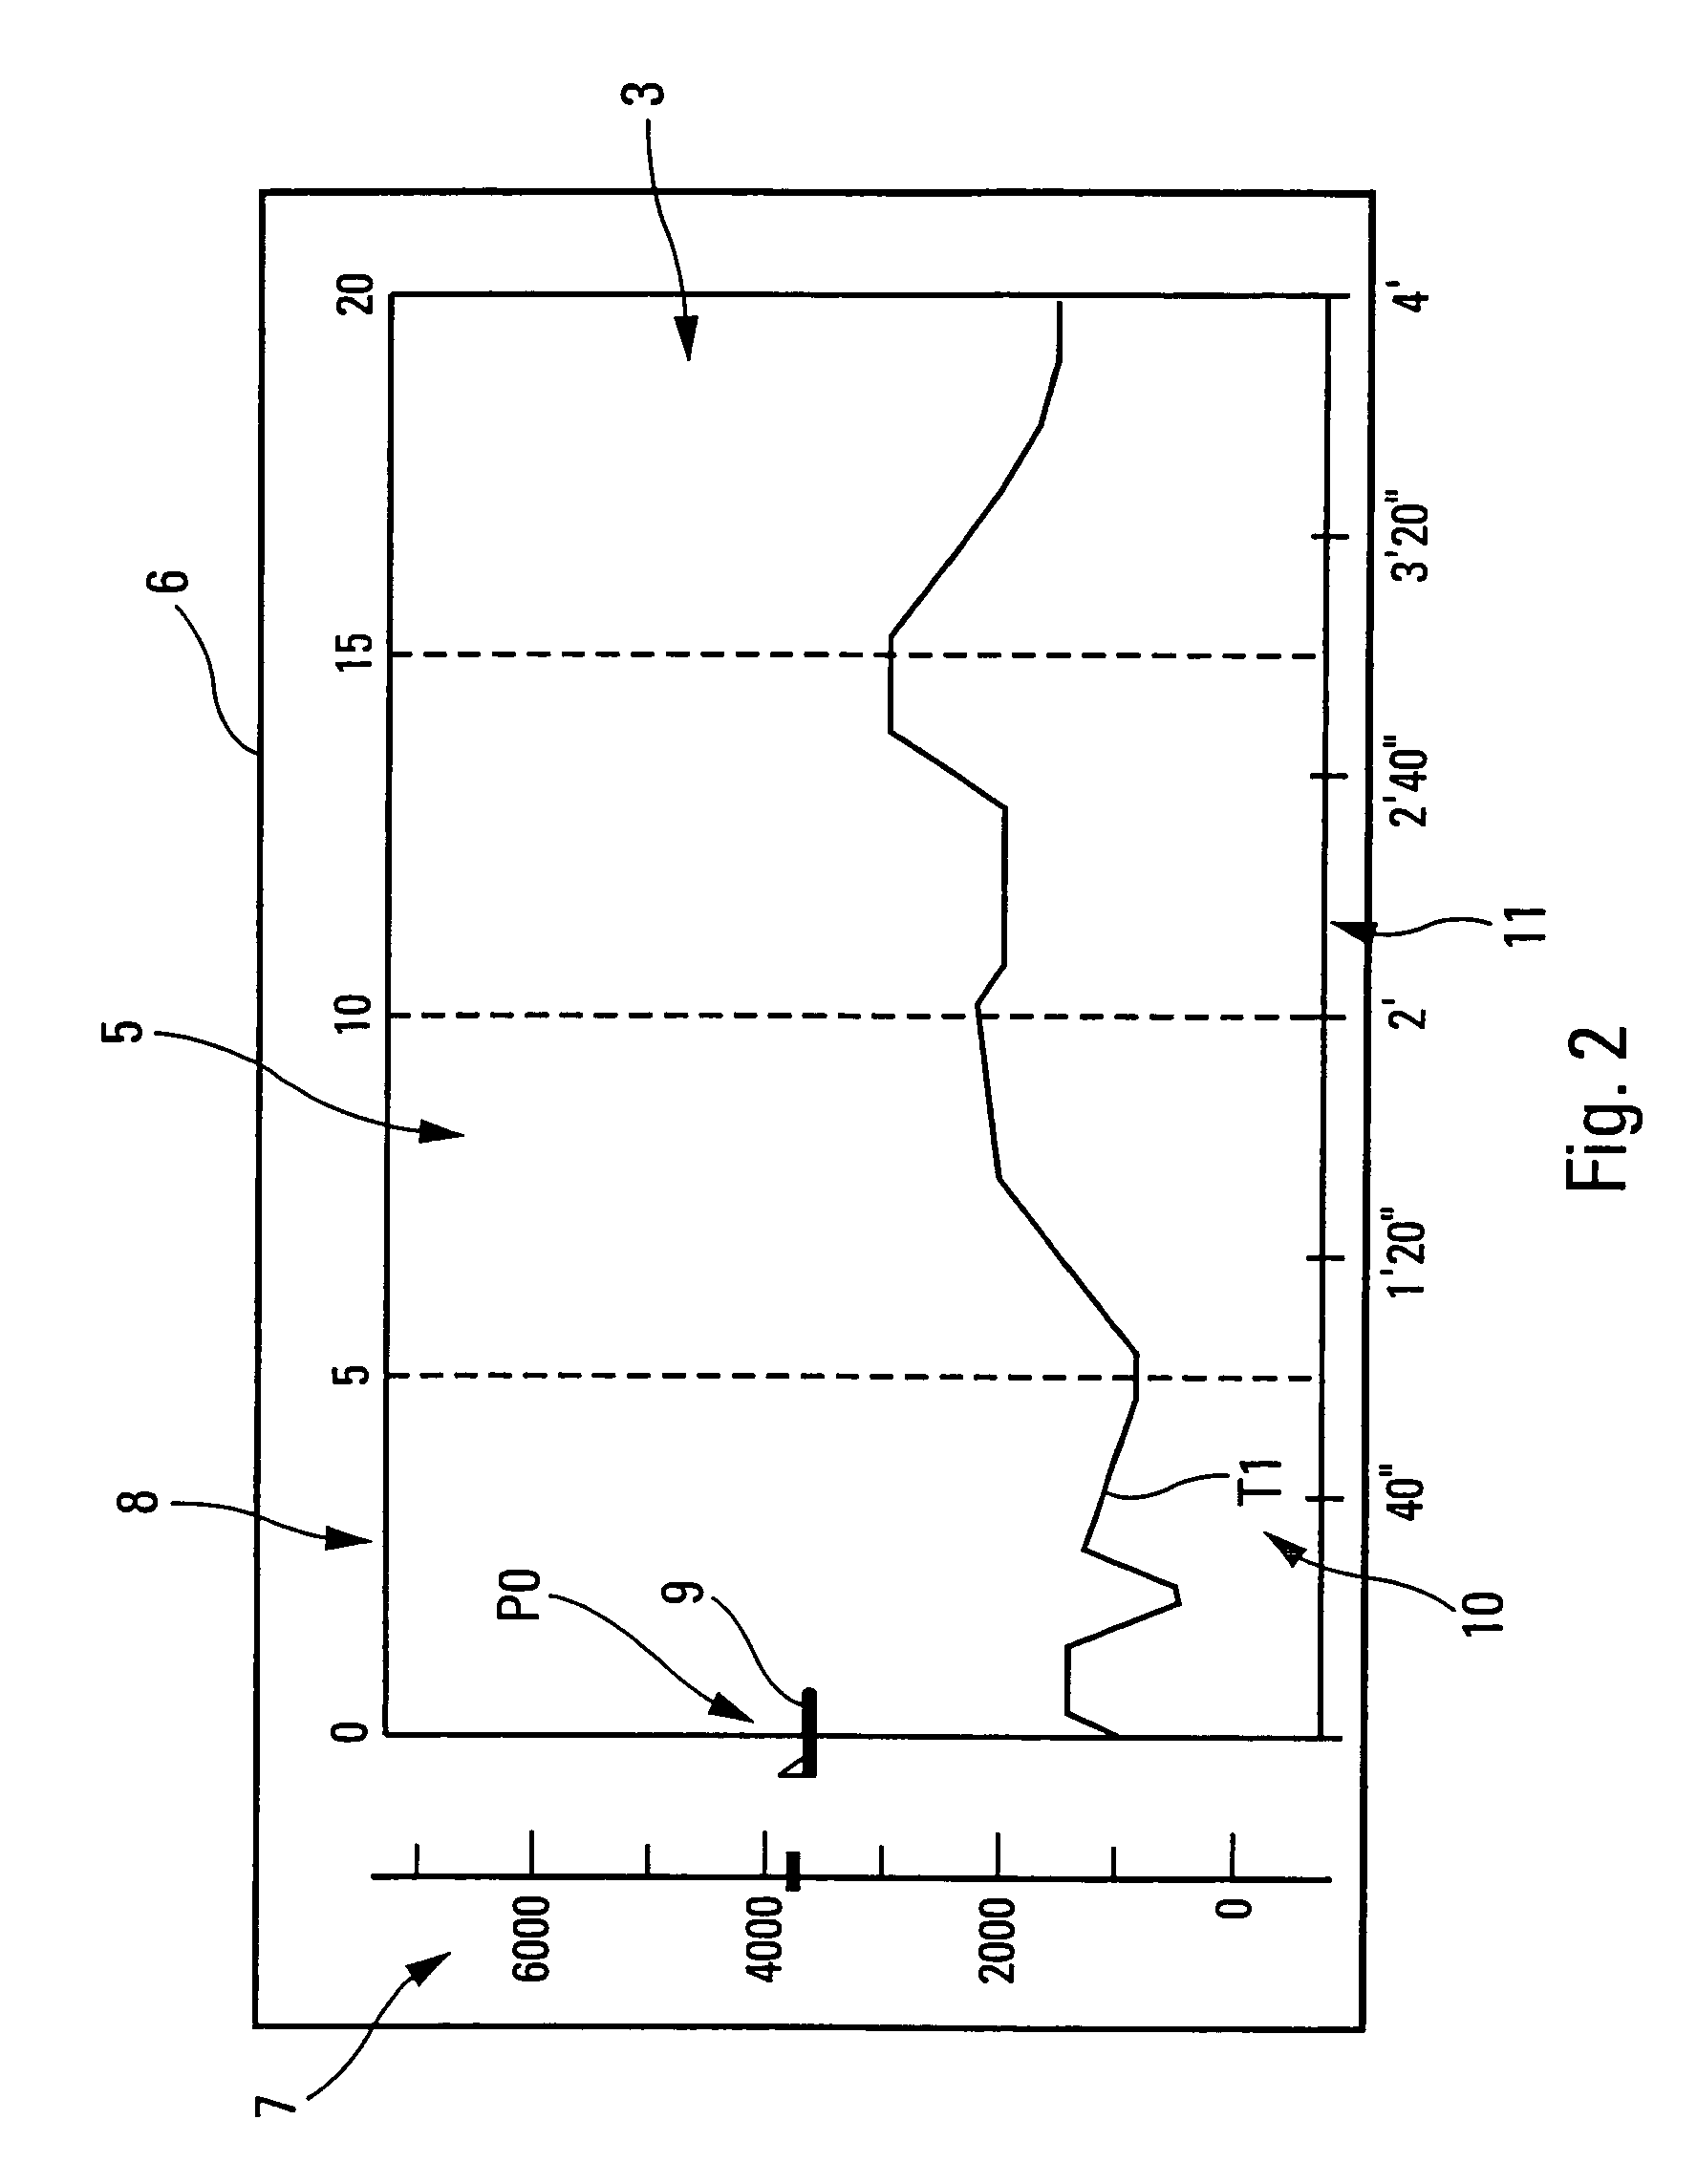 Method and device for assisting in the piloting of an aircraft in free flight